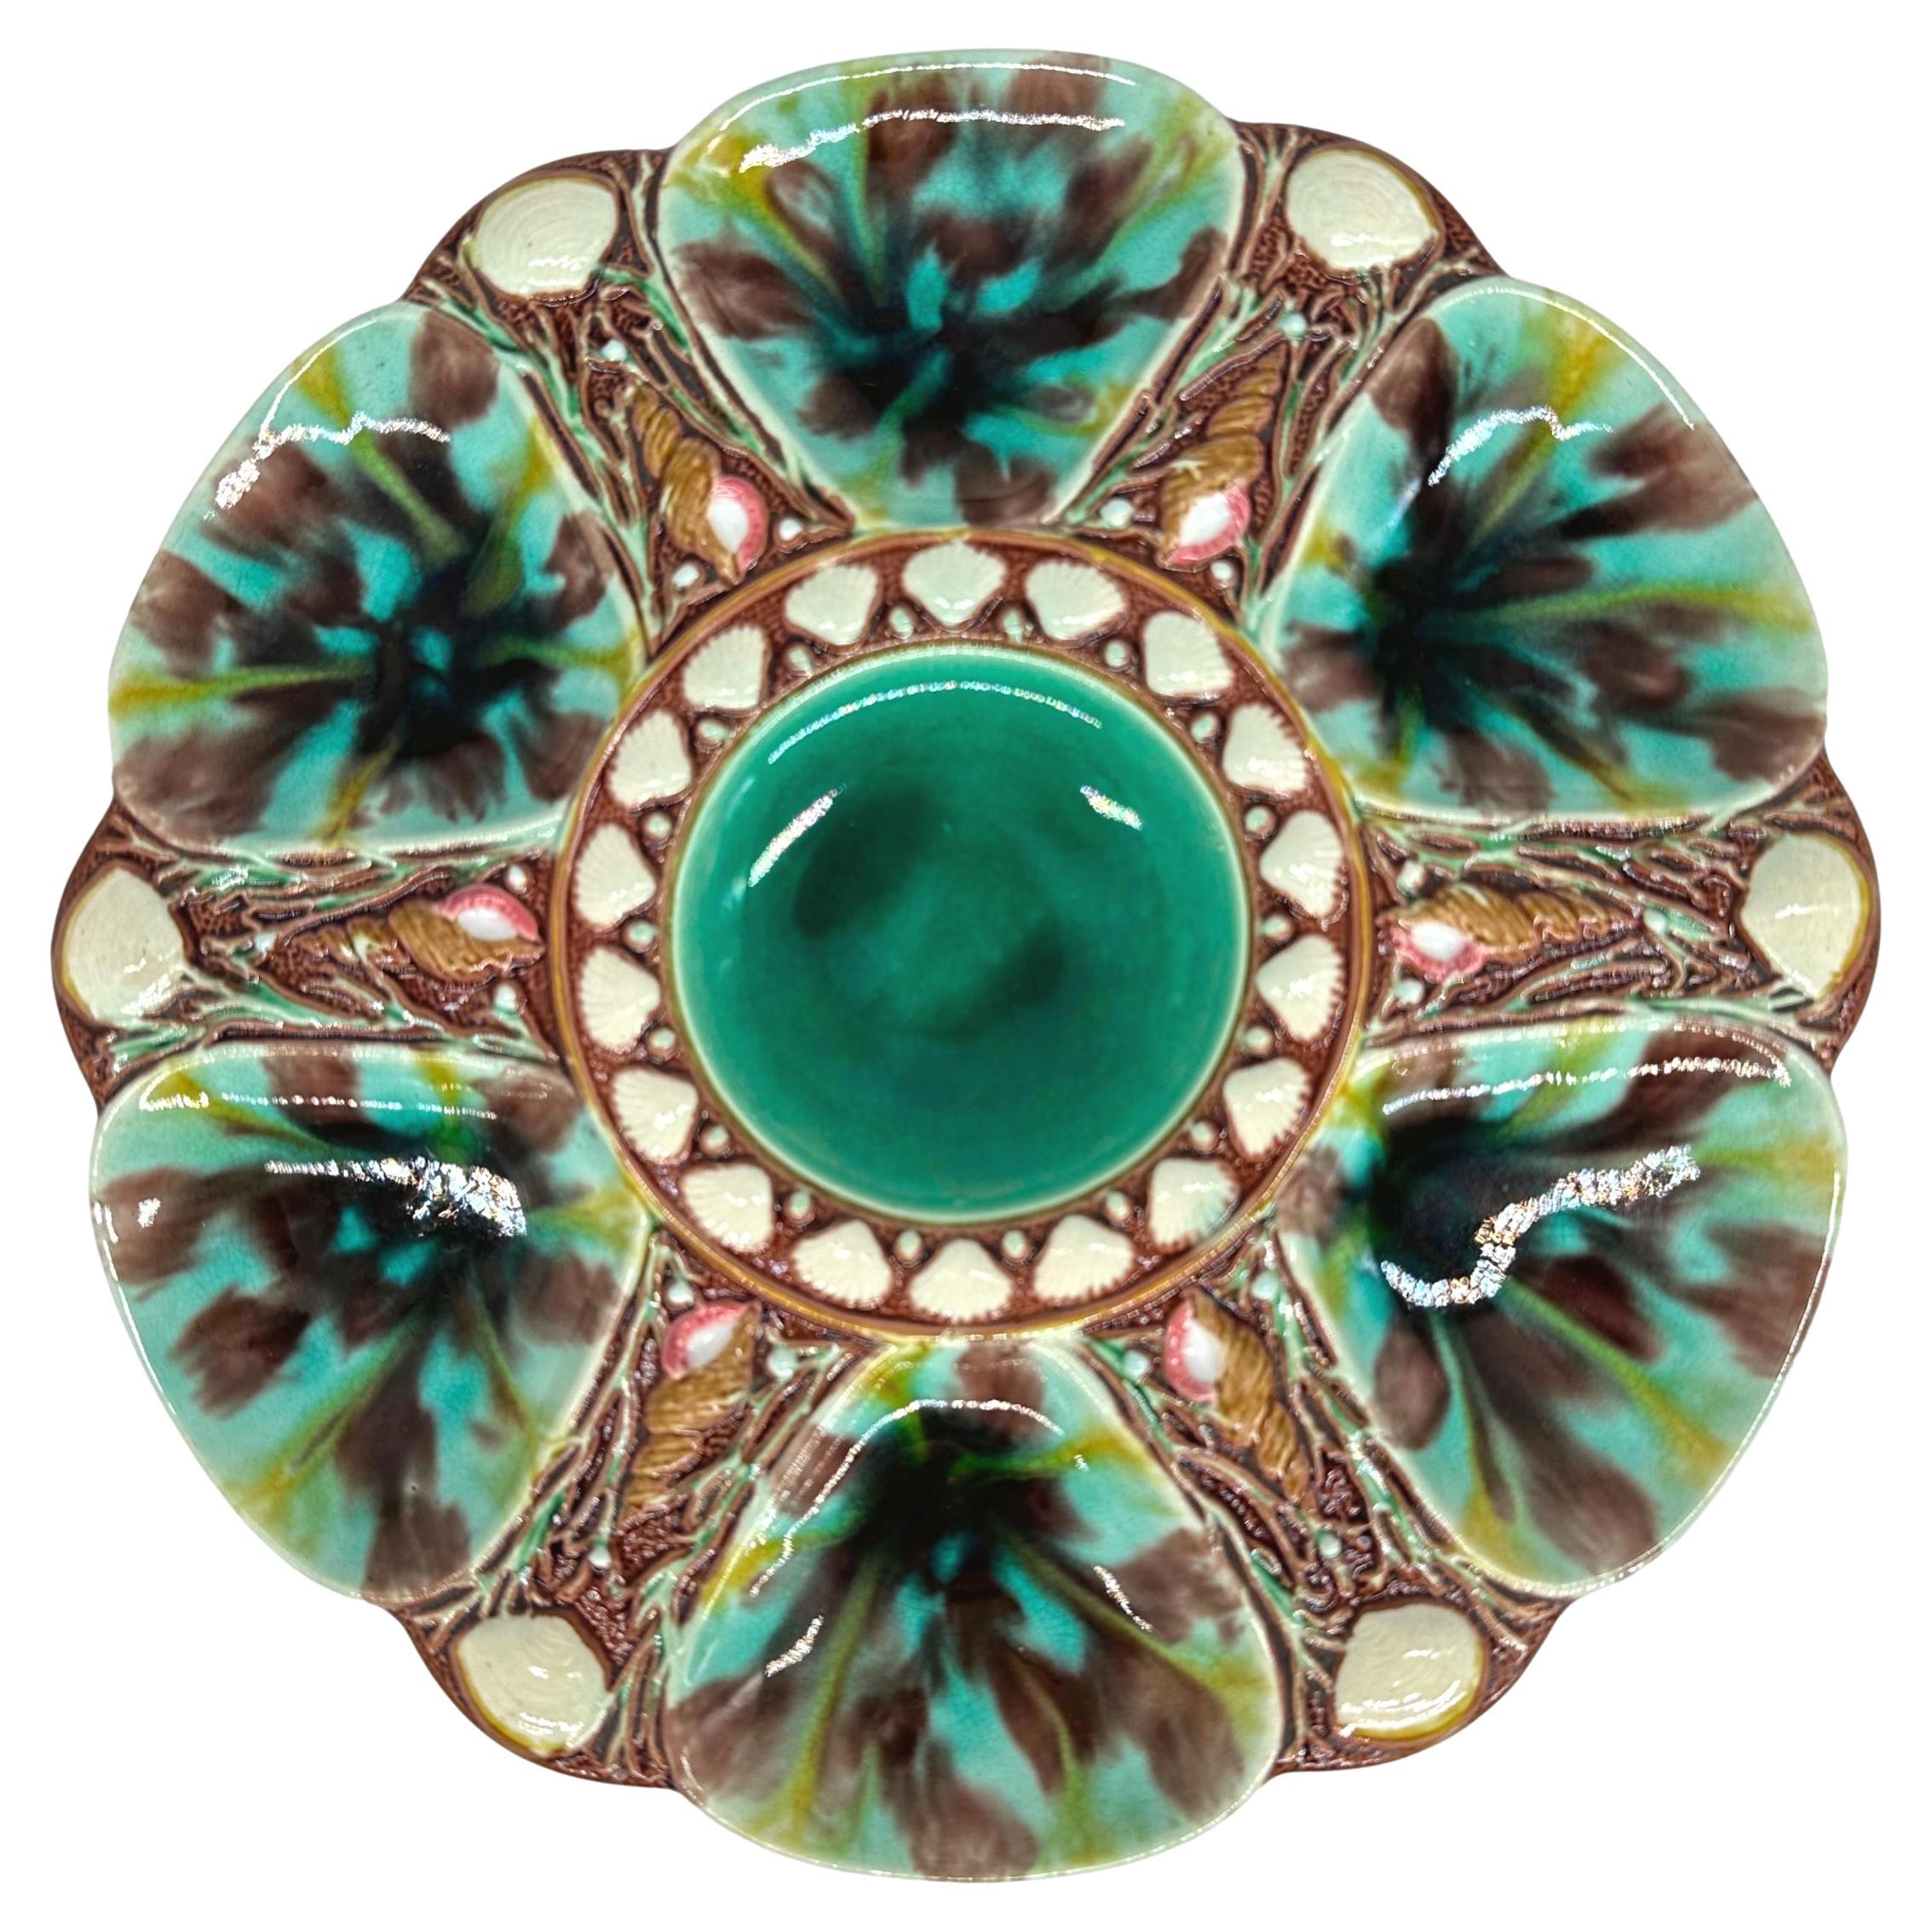 Minton Majolica Oyster Plate, Mottled Leopard Spots, English, Dated 1870